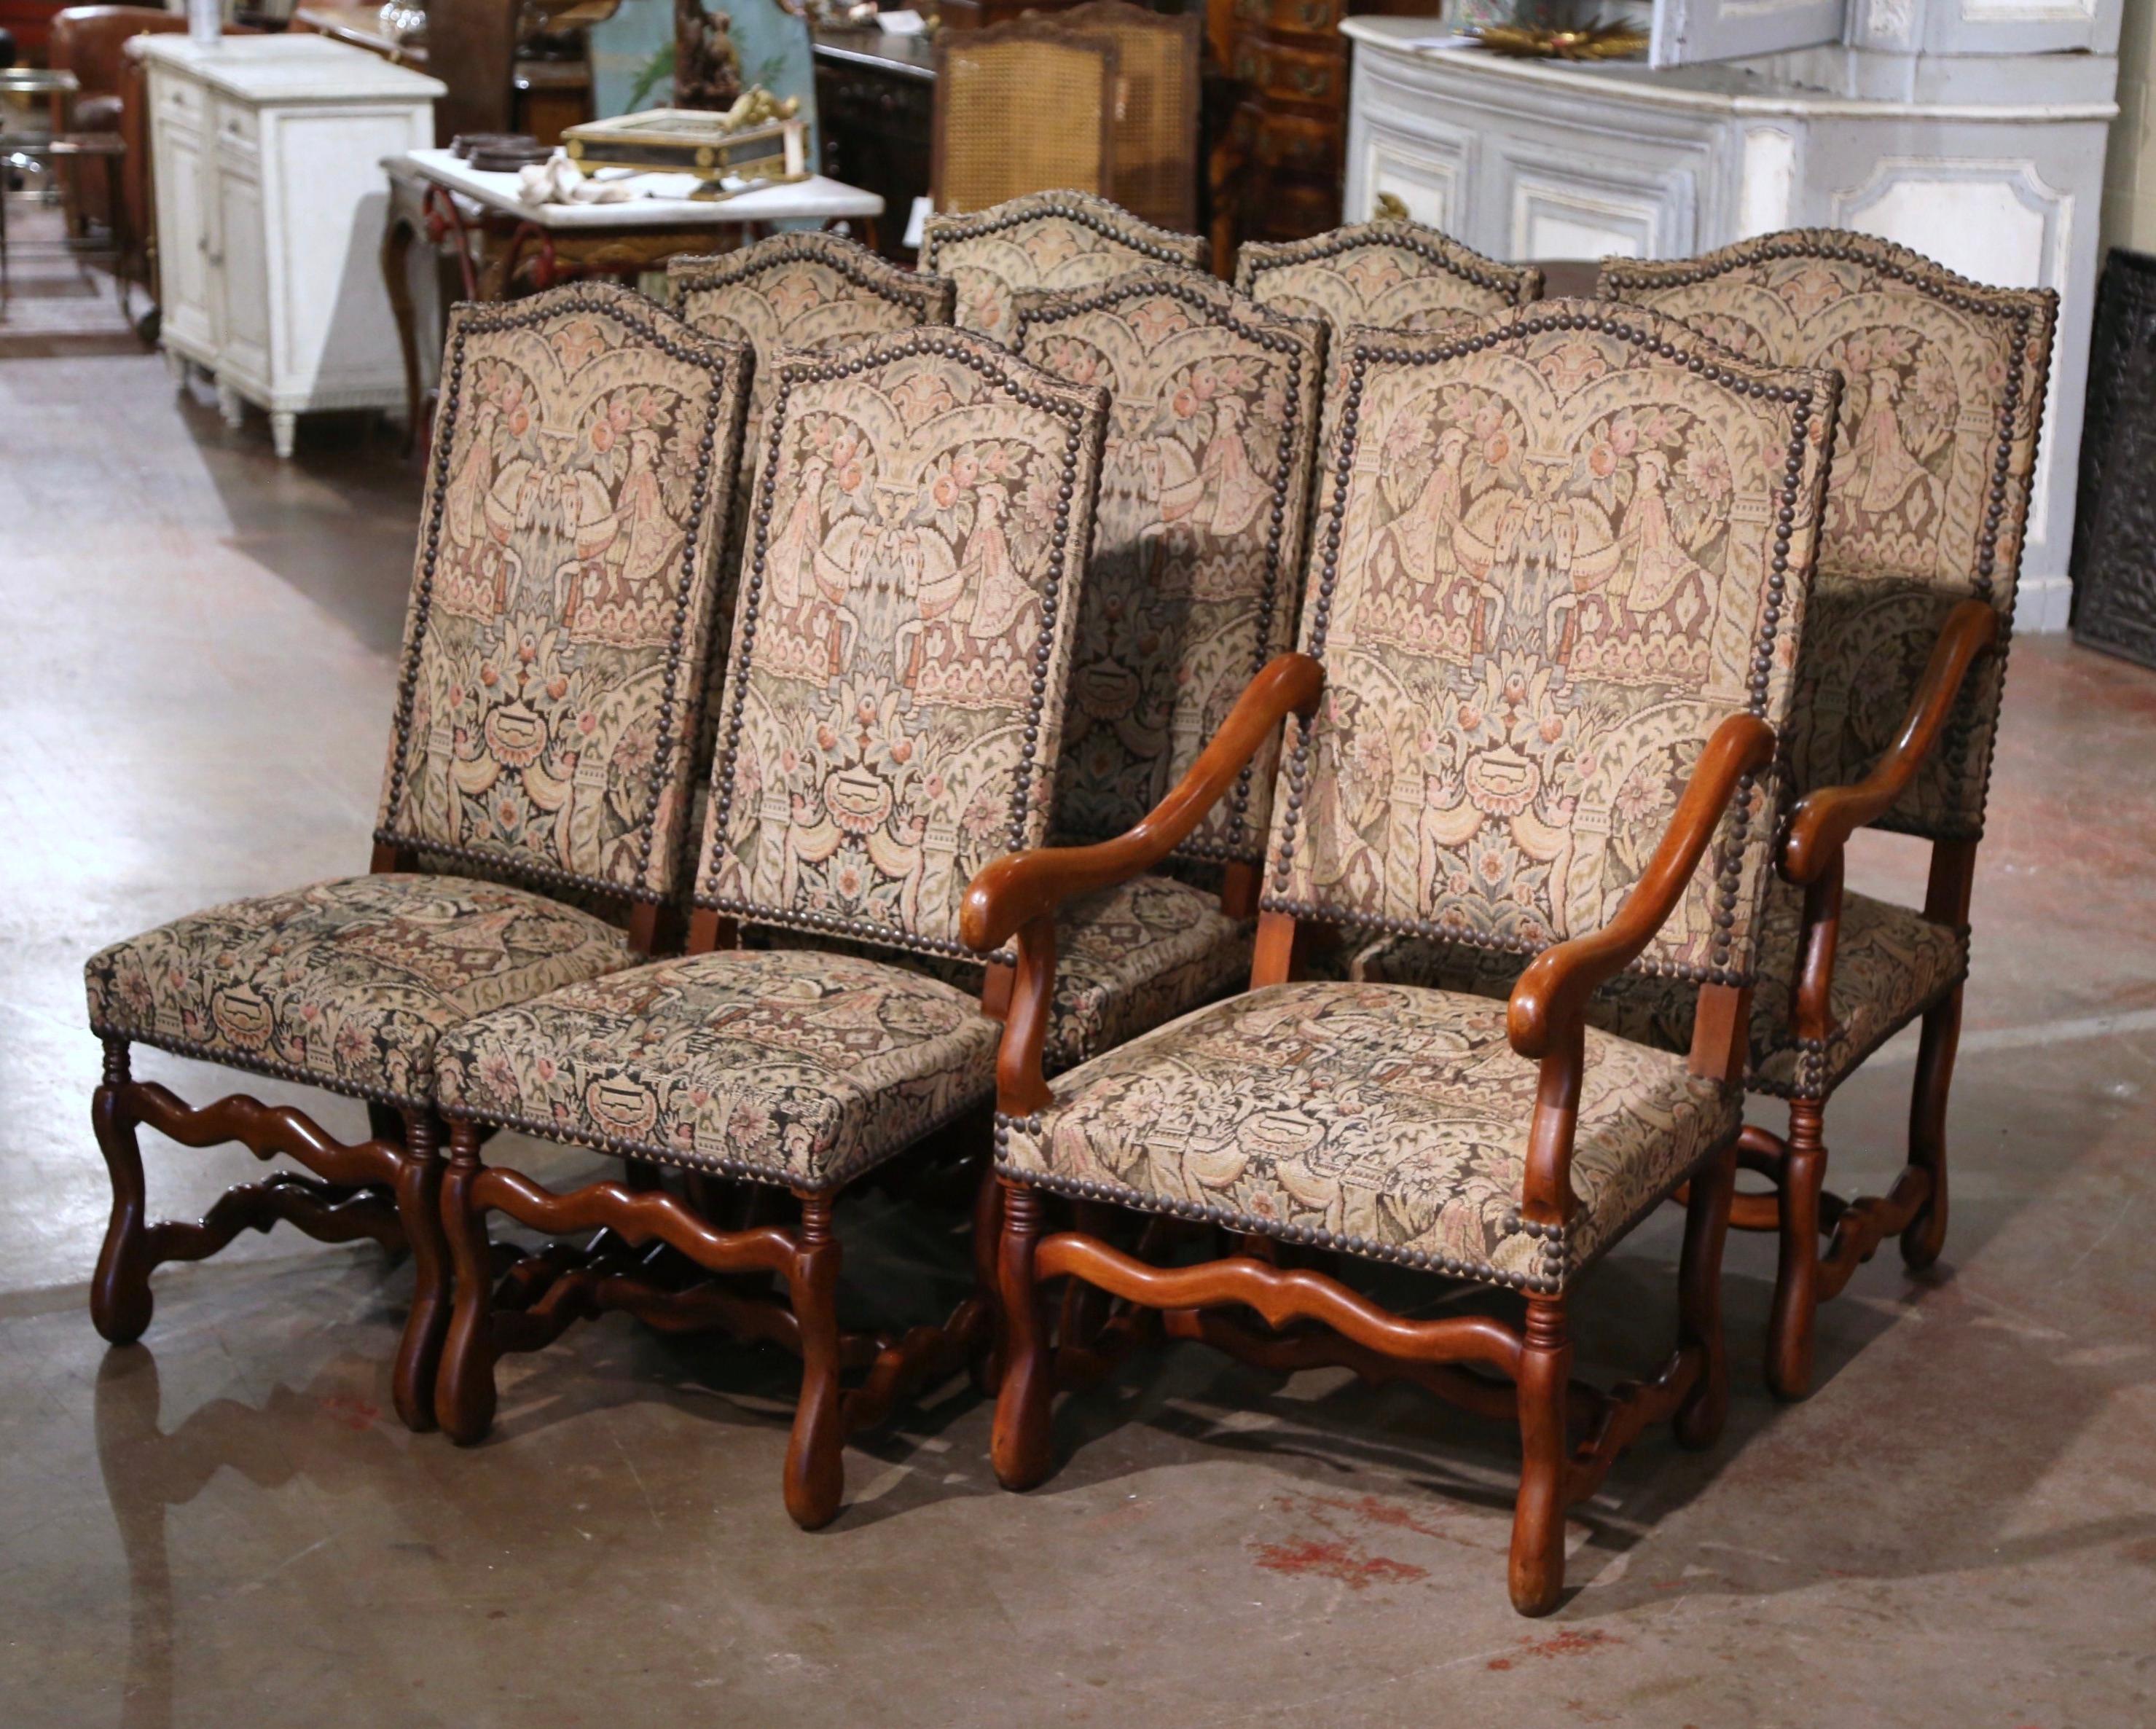 Dress a dining or breakfast table with this elegant suite of highback side chairs and matching armchairs! Crafted in France circa 1960 and made of beech wood, each chair stands on carved 